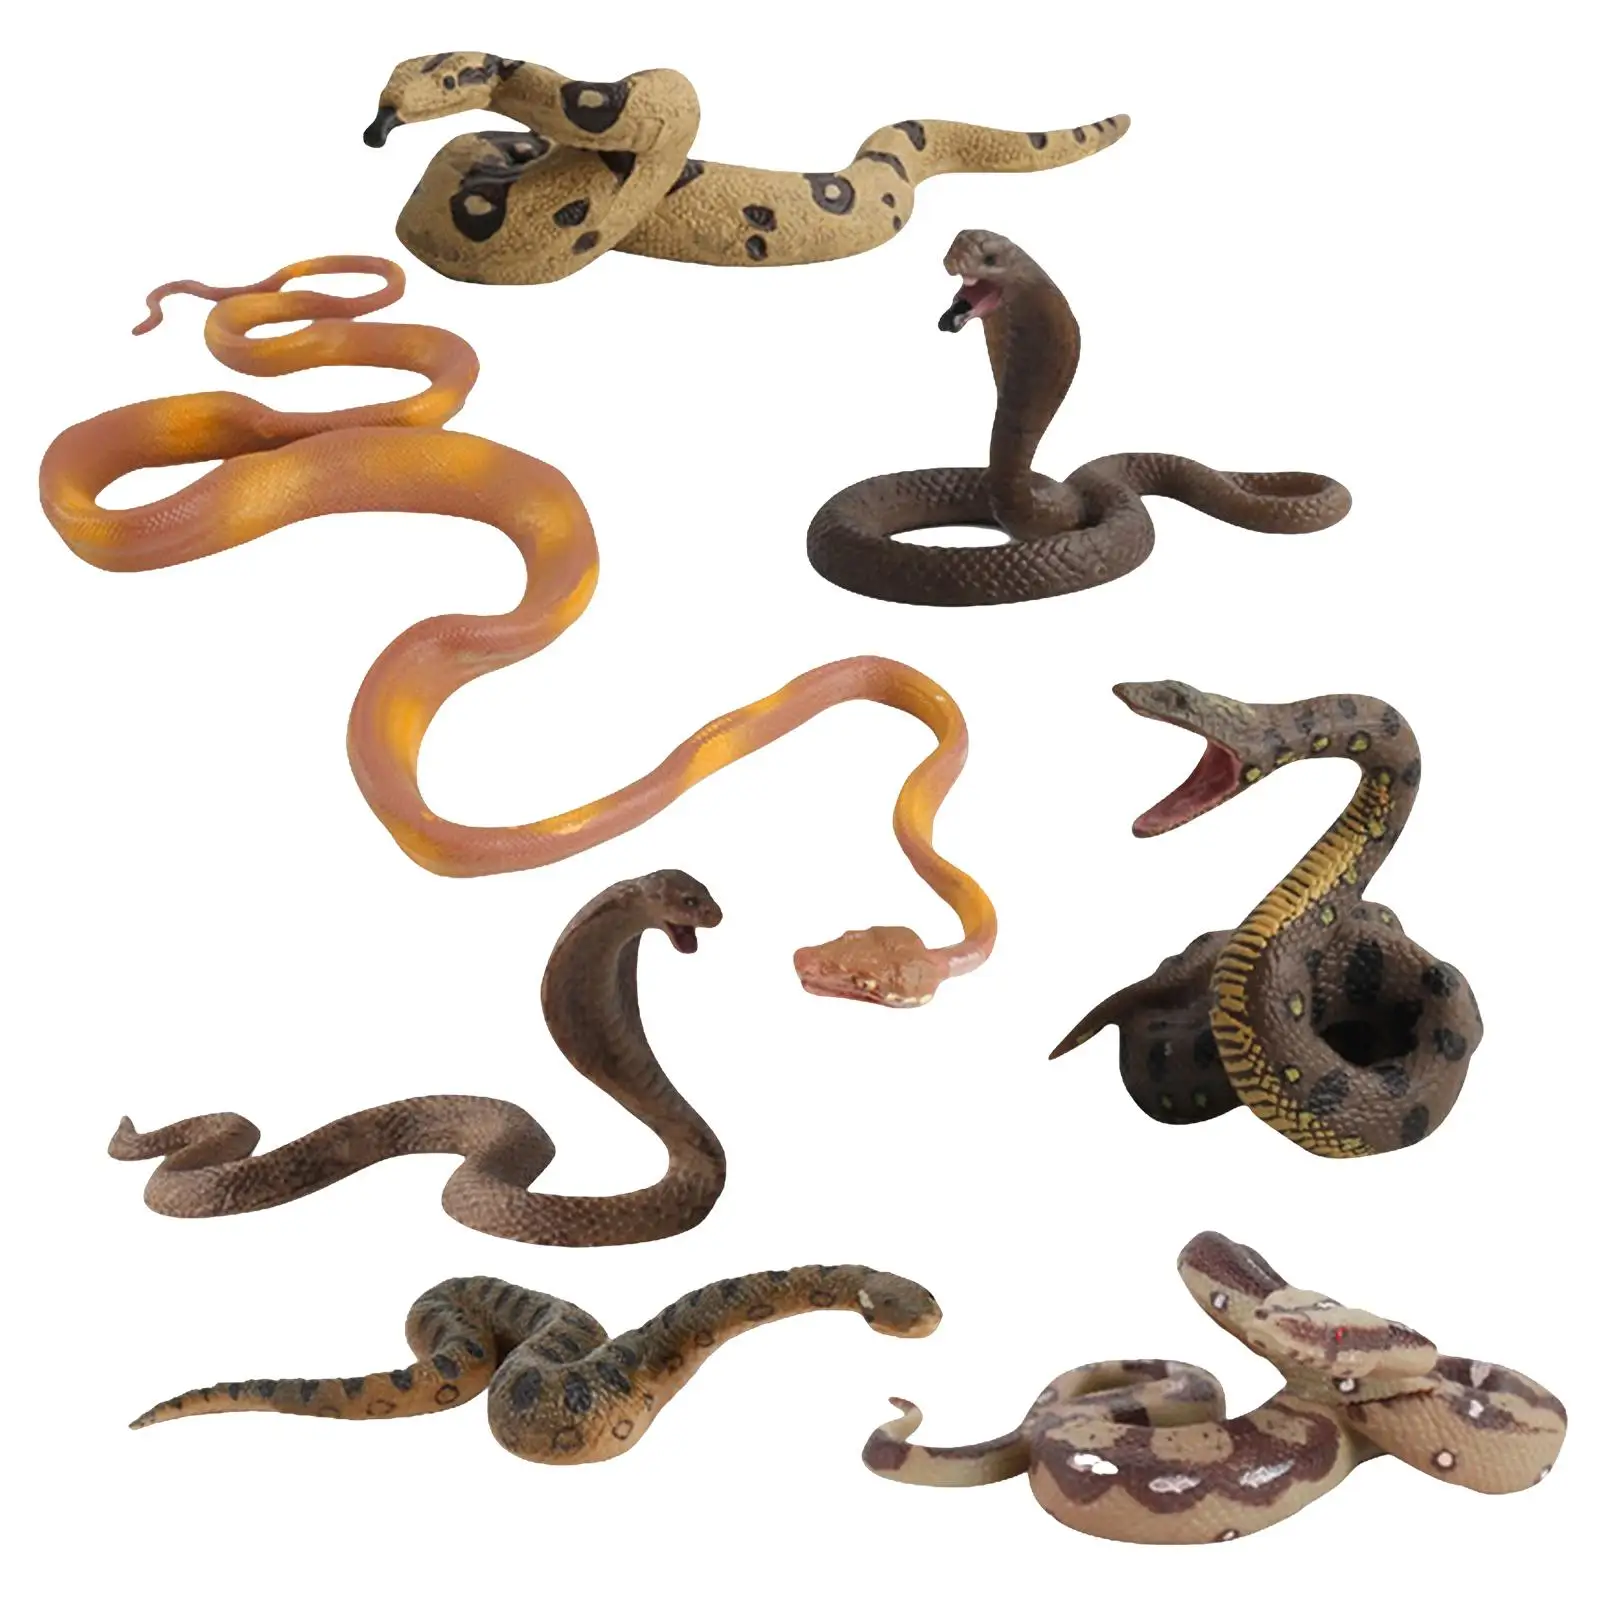 High Simulation Snake Model Toy for Tabletop Decors Party Favor Jokes Prop